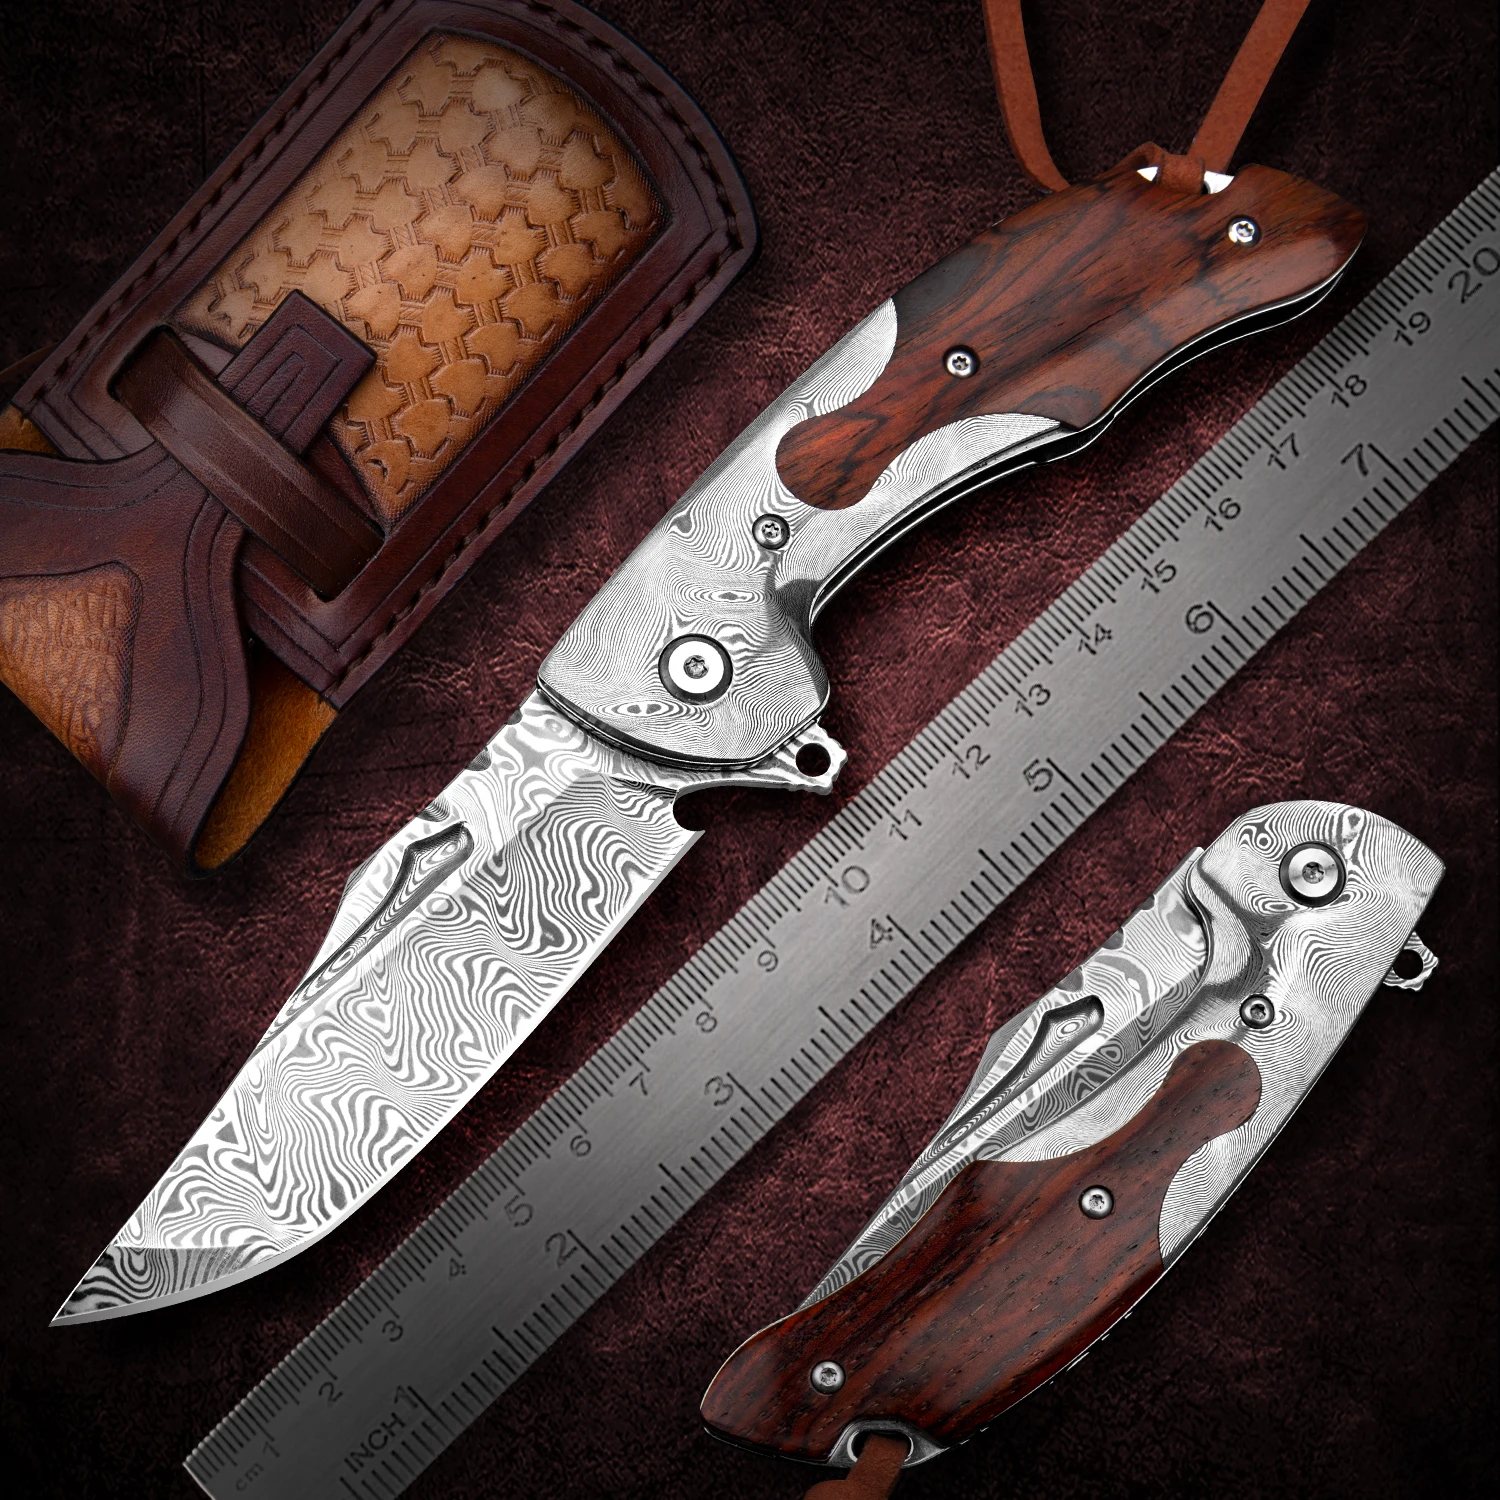 NEWOOTZ Damascus Folding Knife Rosewood Handle with Leather Sheath EDC Outdoor Tactical Knives for Camping Self Defense Peeling